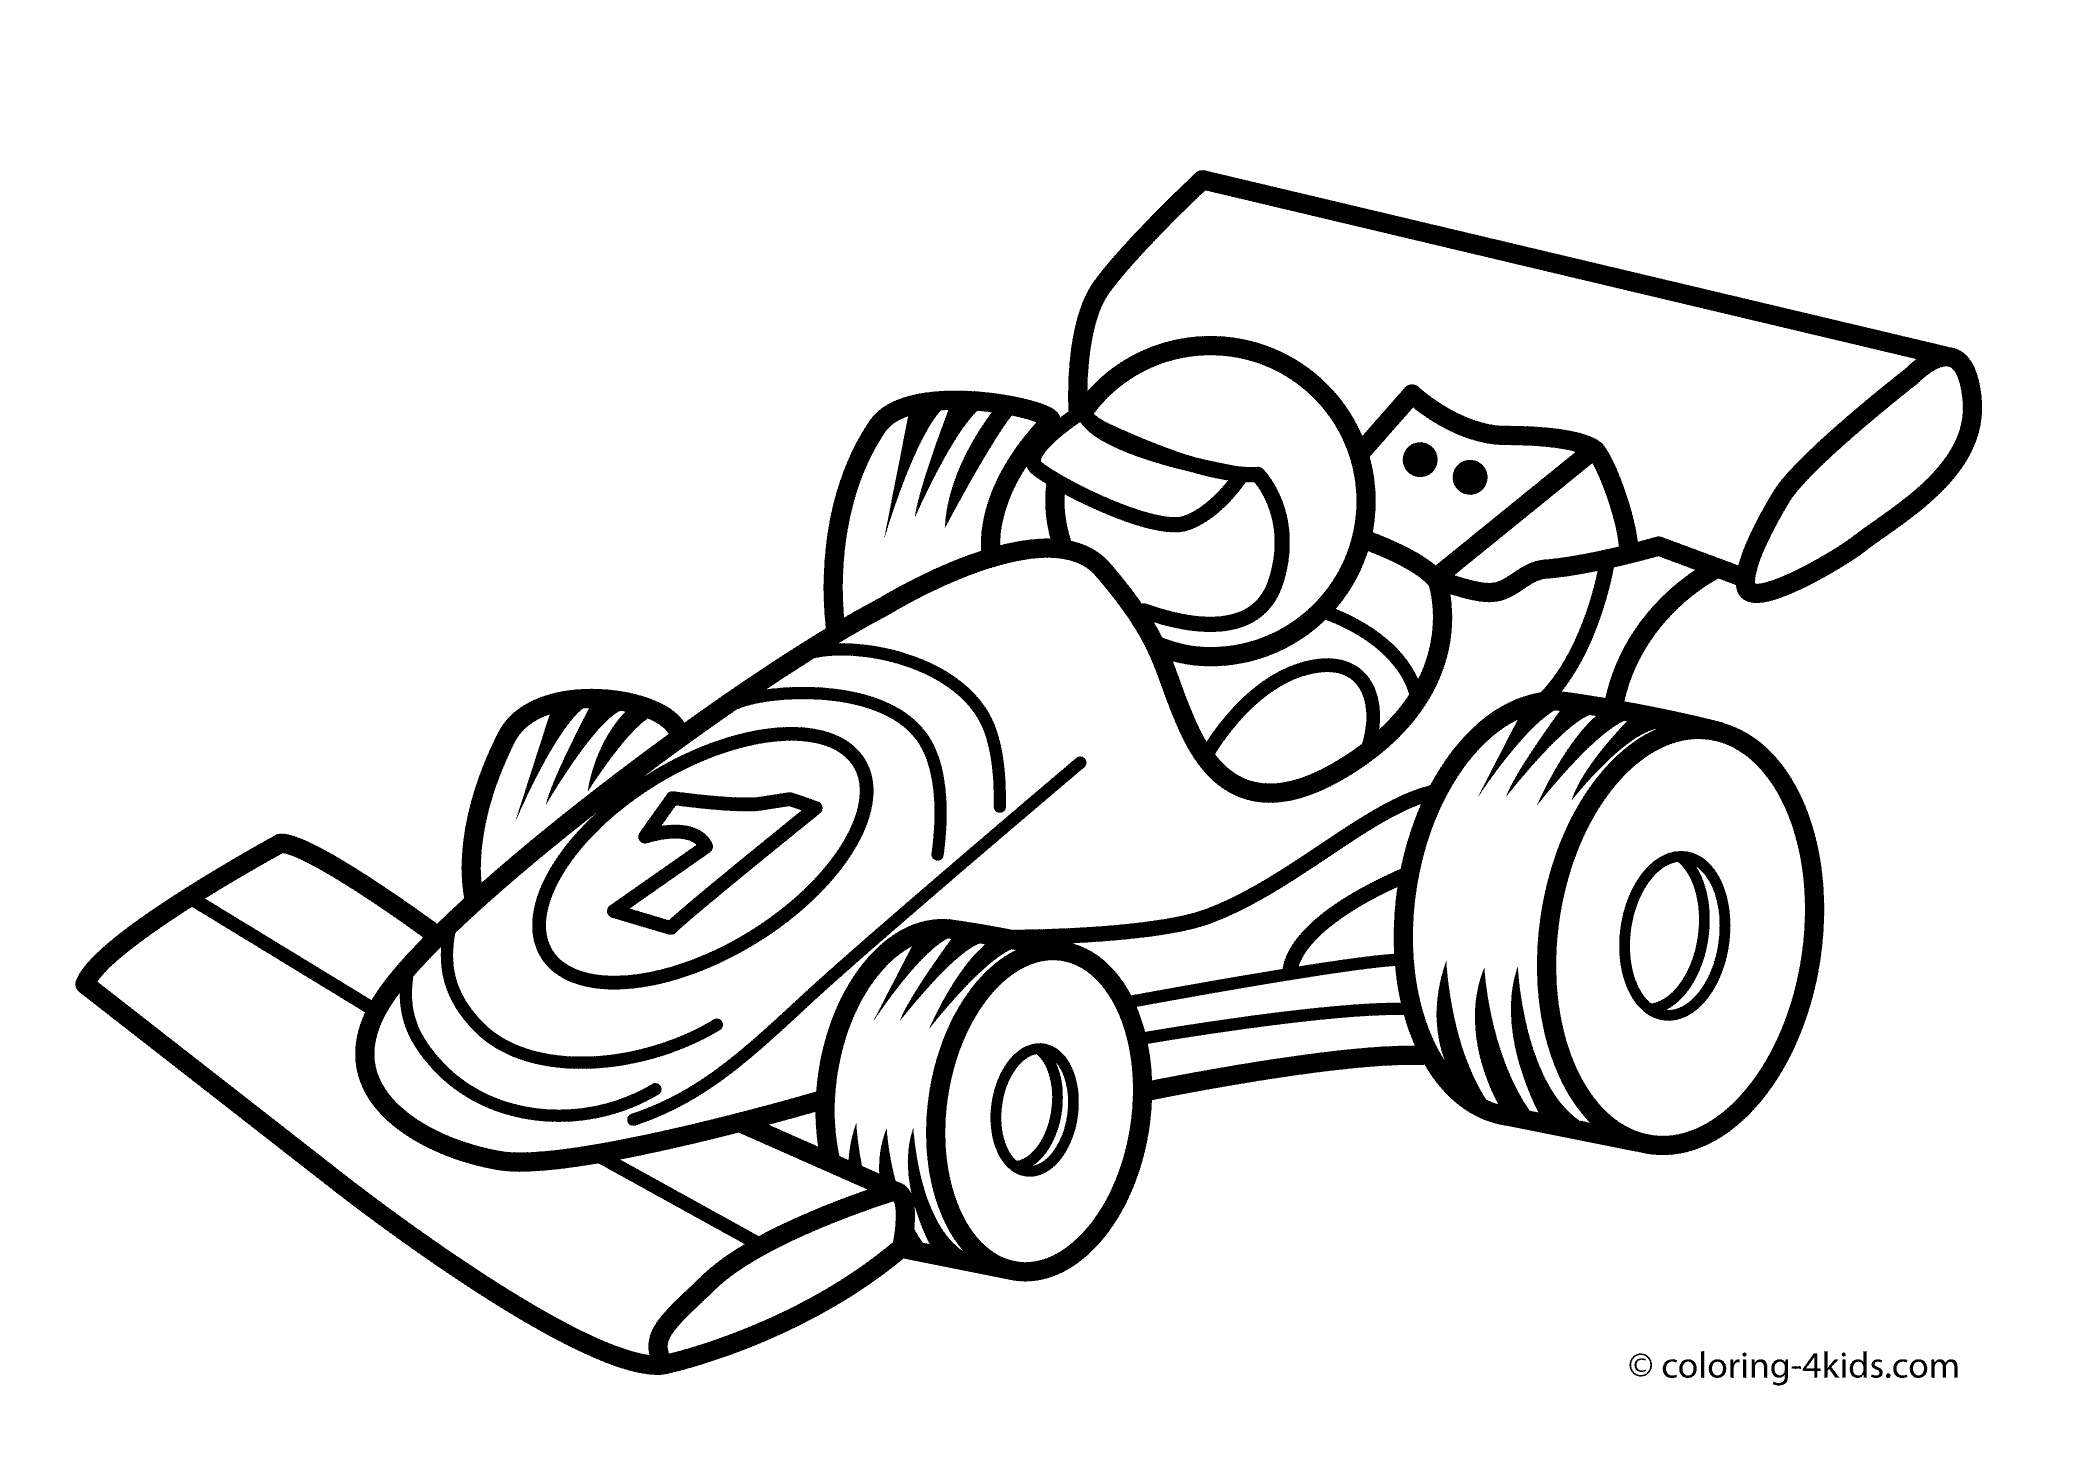 Coloring Page Of A Race Car Drag Race Car Coloring Pages